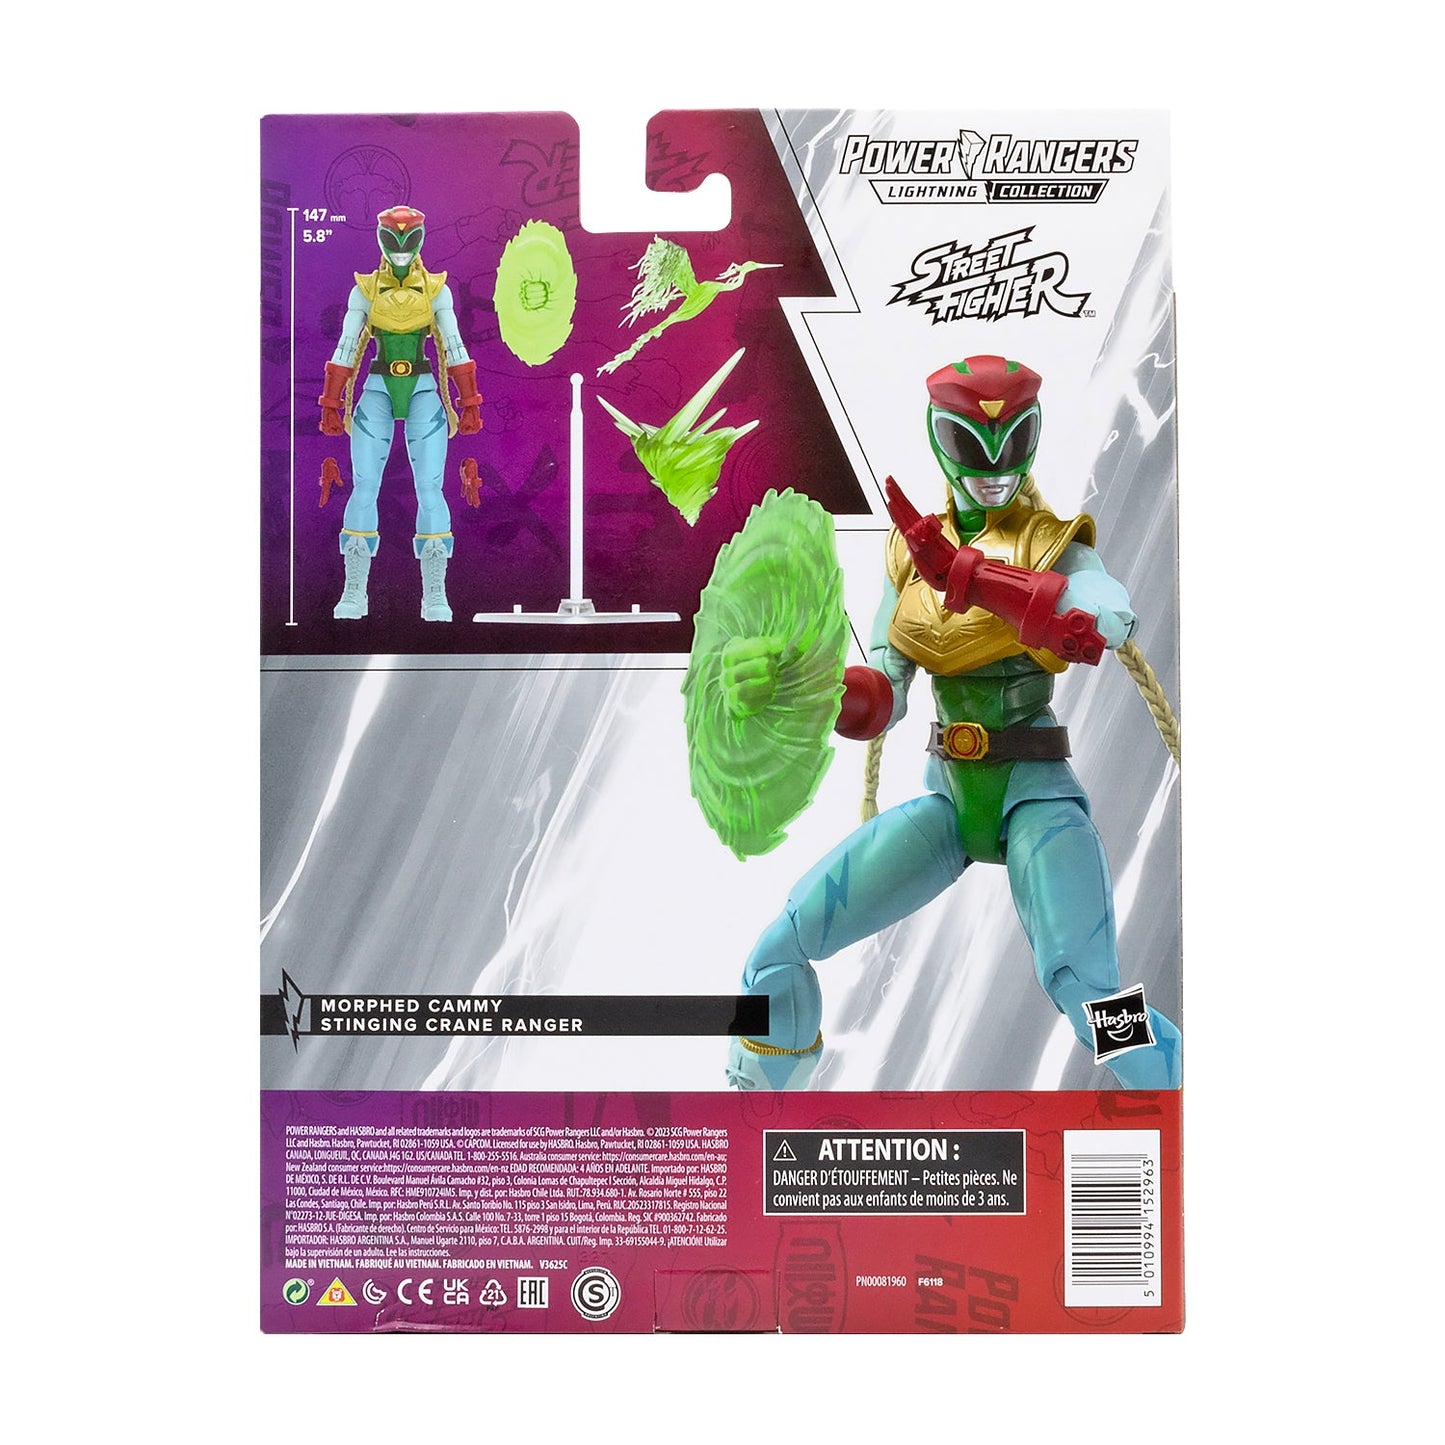 Power Rangers X Street Fighter Lightning Collection Morphed Cammy Stinging Crane Ranger Action Figure